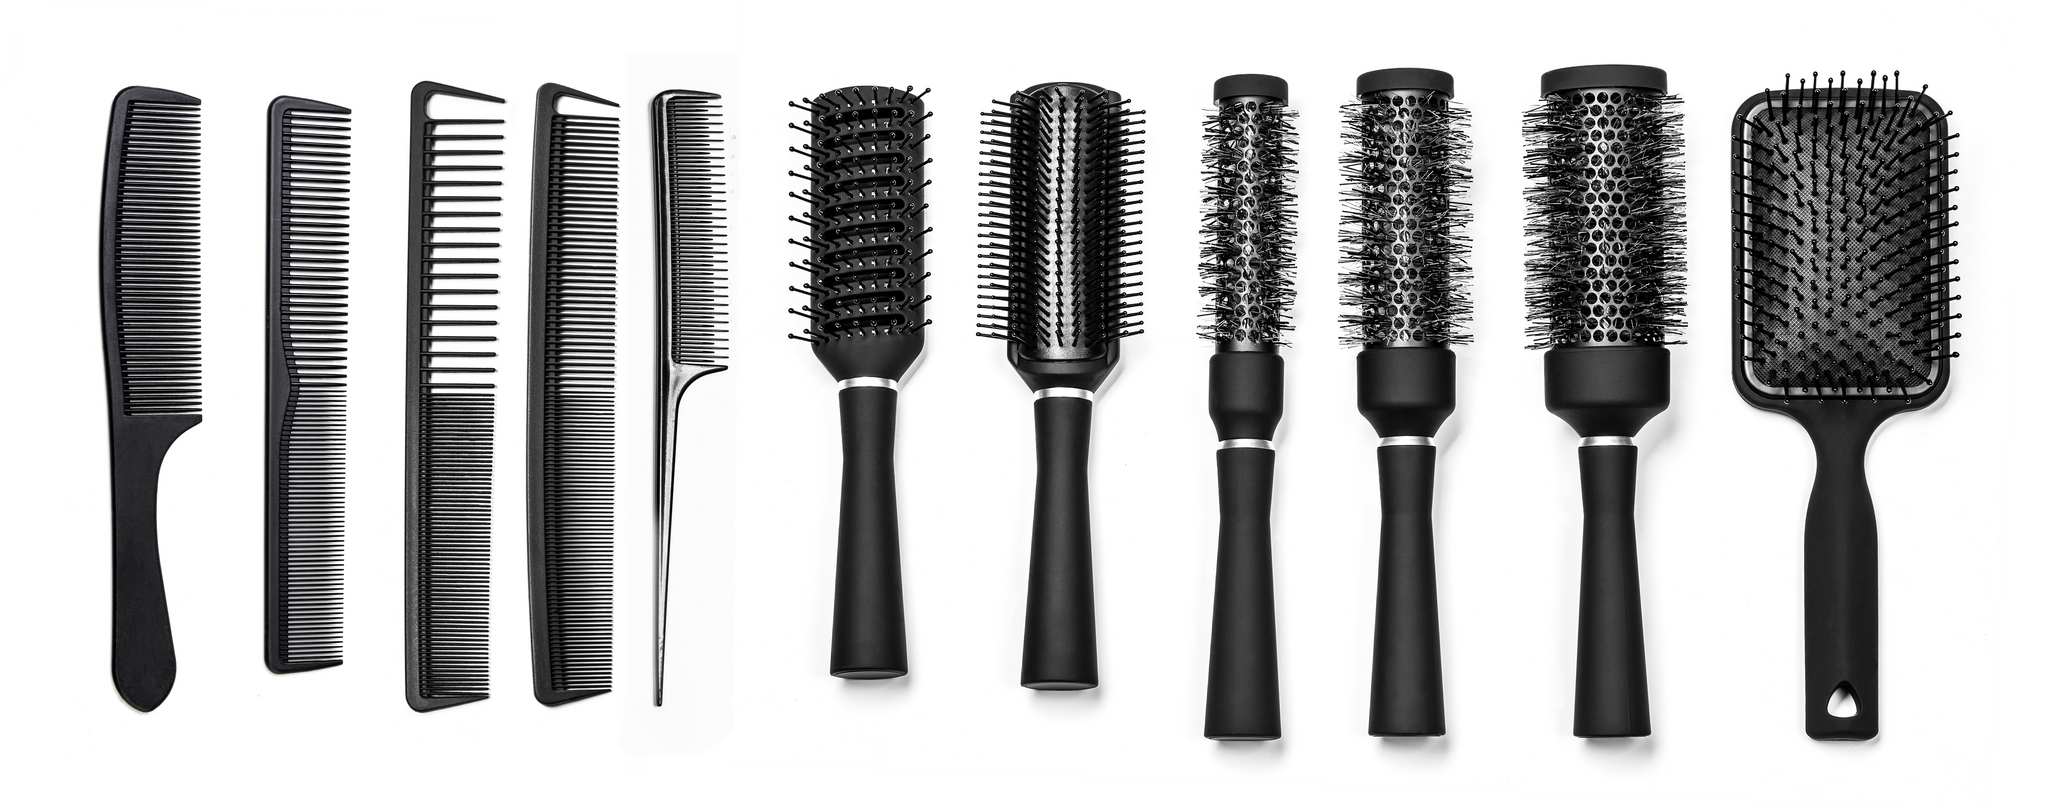 Which Hair Brush Is The Best For Your Hair?